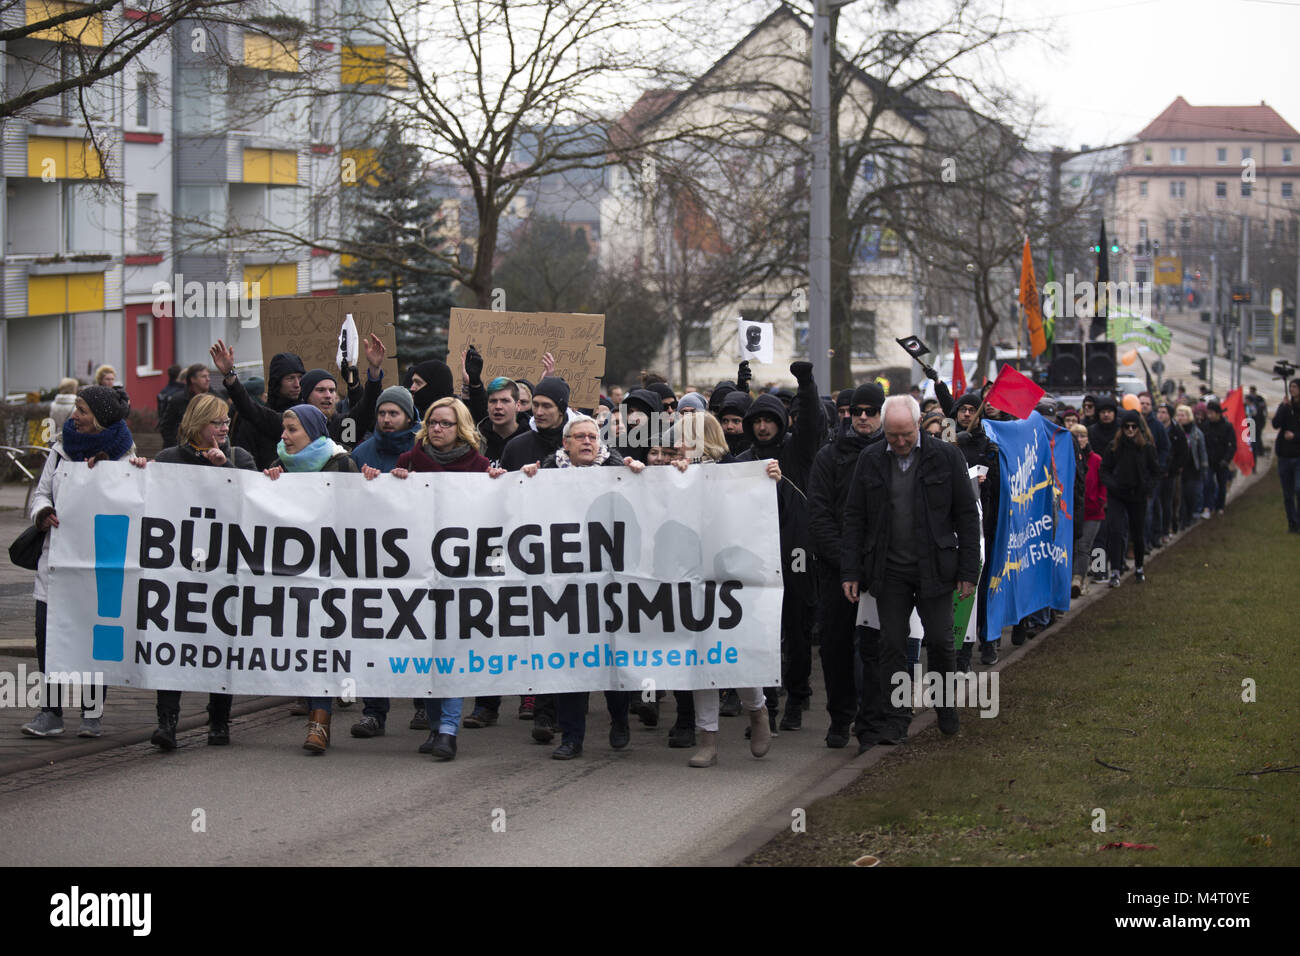 February 17, 2018 - Nordhausen, ThÃ¼ringen, Germany - Counter-protest of the ''Alliance against right-wing extremism Nordhausen' Credit: Jannis Grosse/ZUMA Wire/Alamy Live News Stock Photo